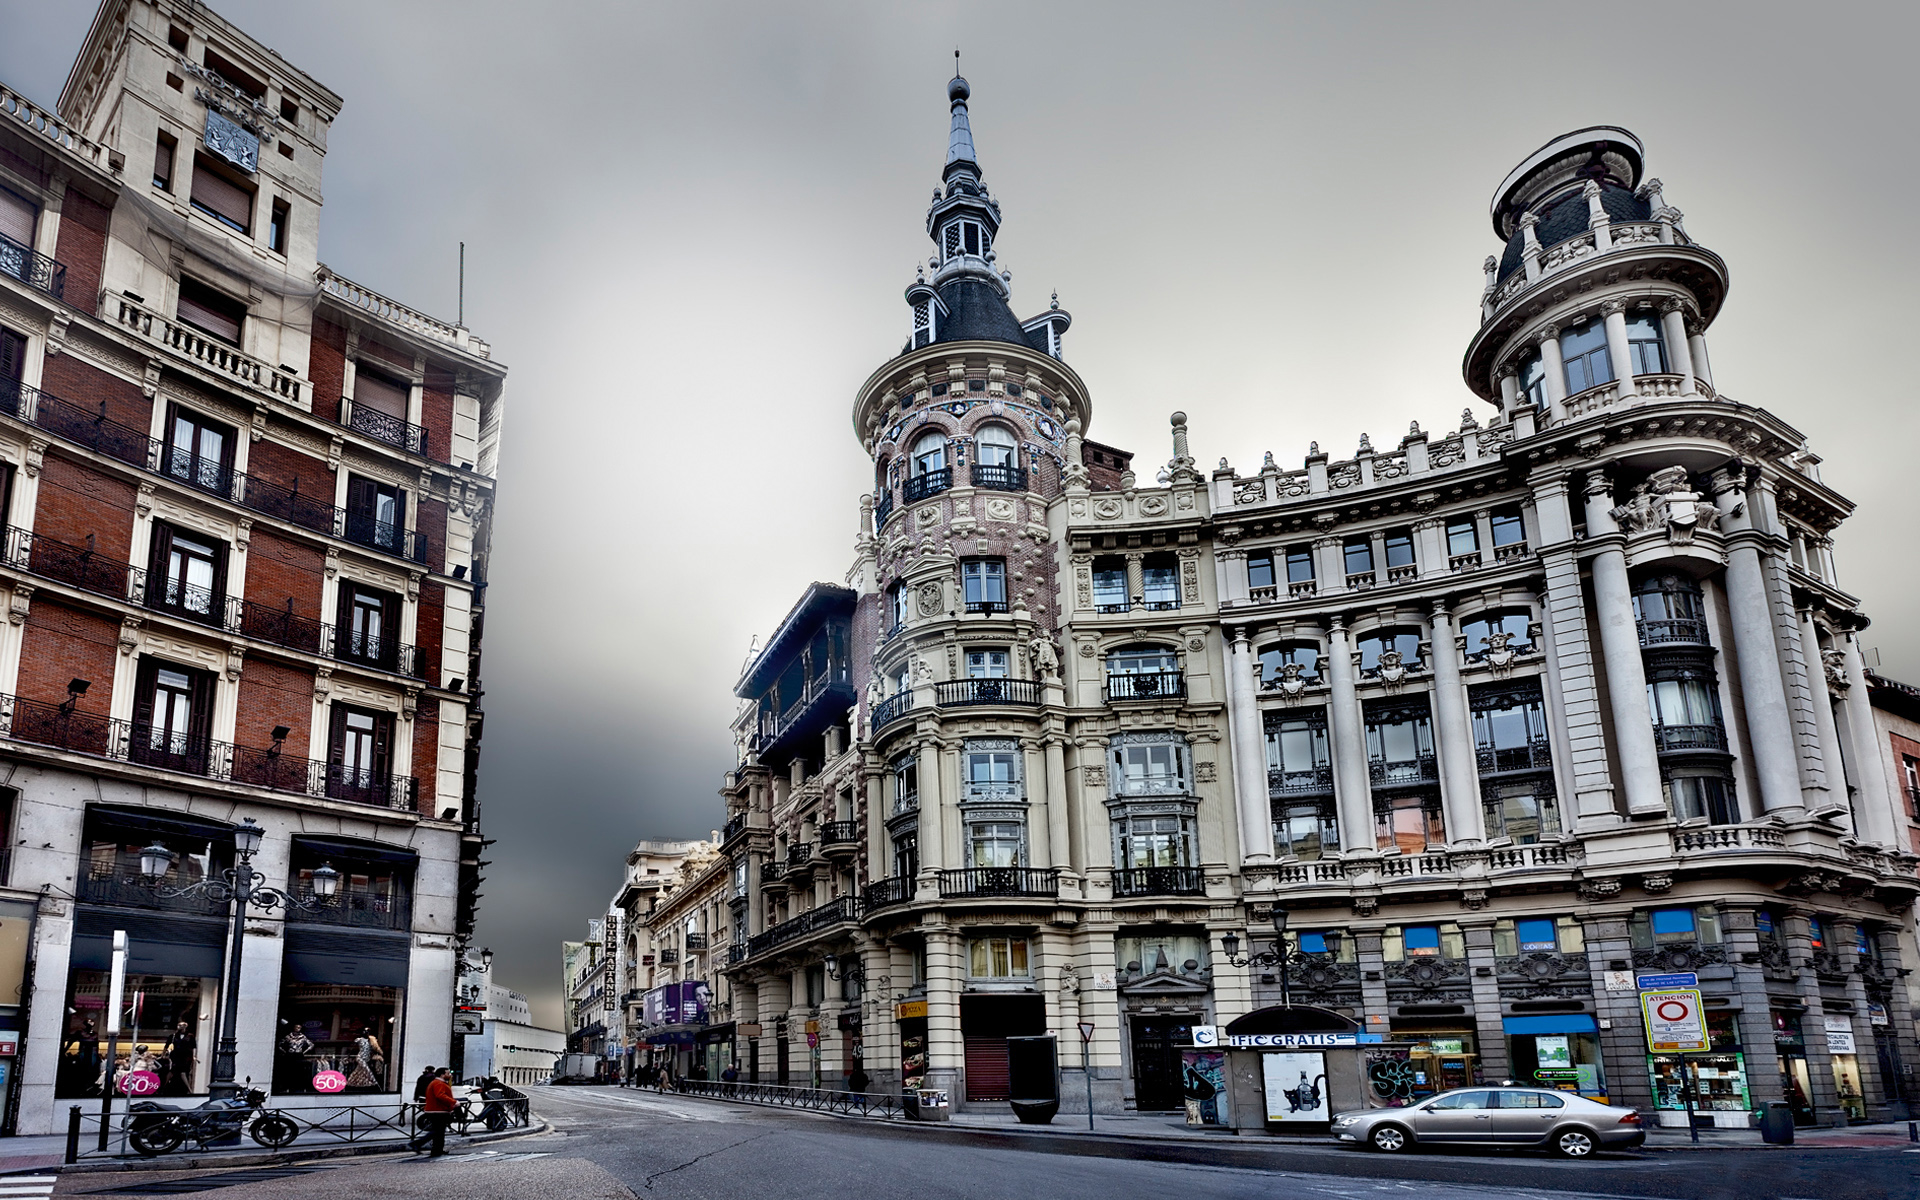 madrid, man made, architecture, building, city, spain